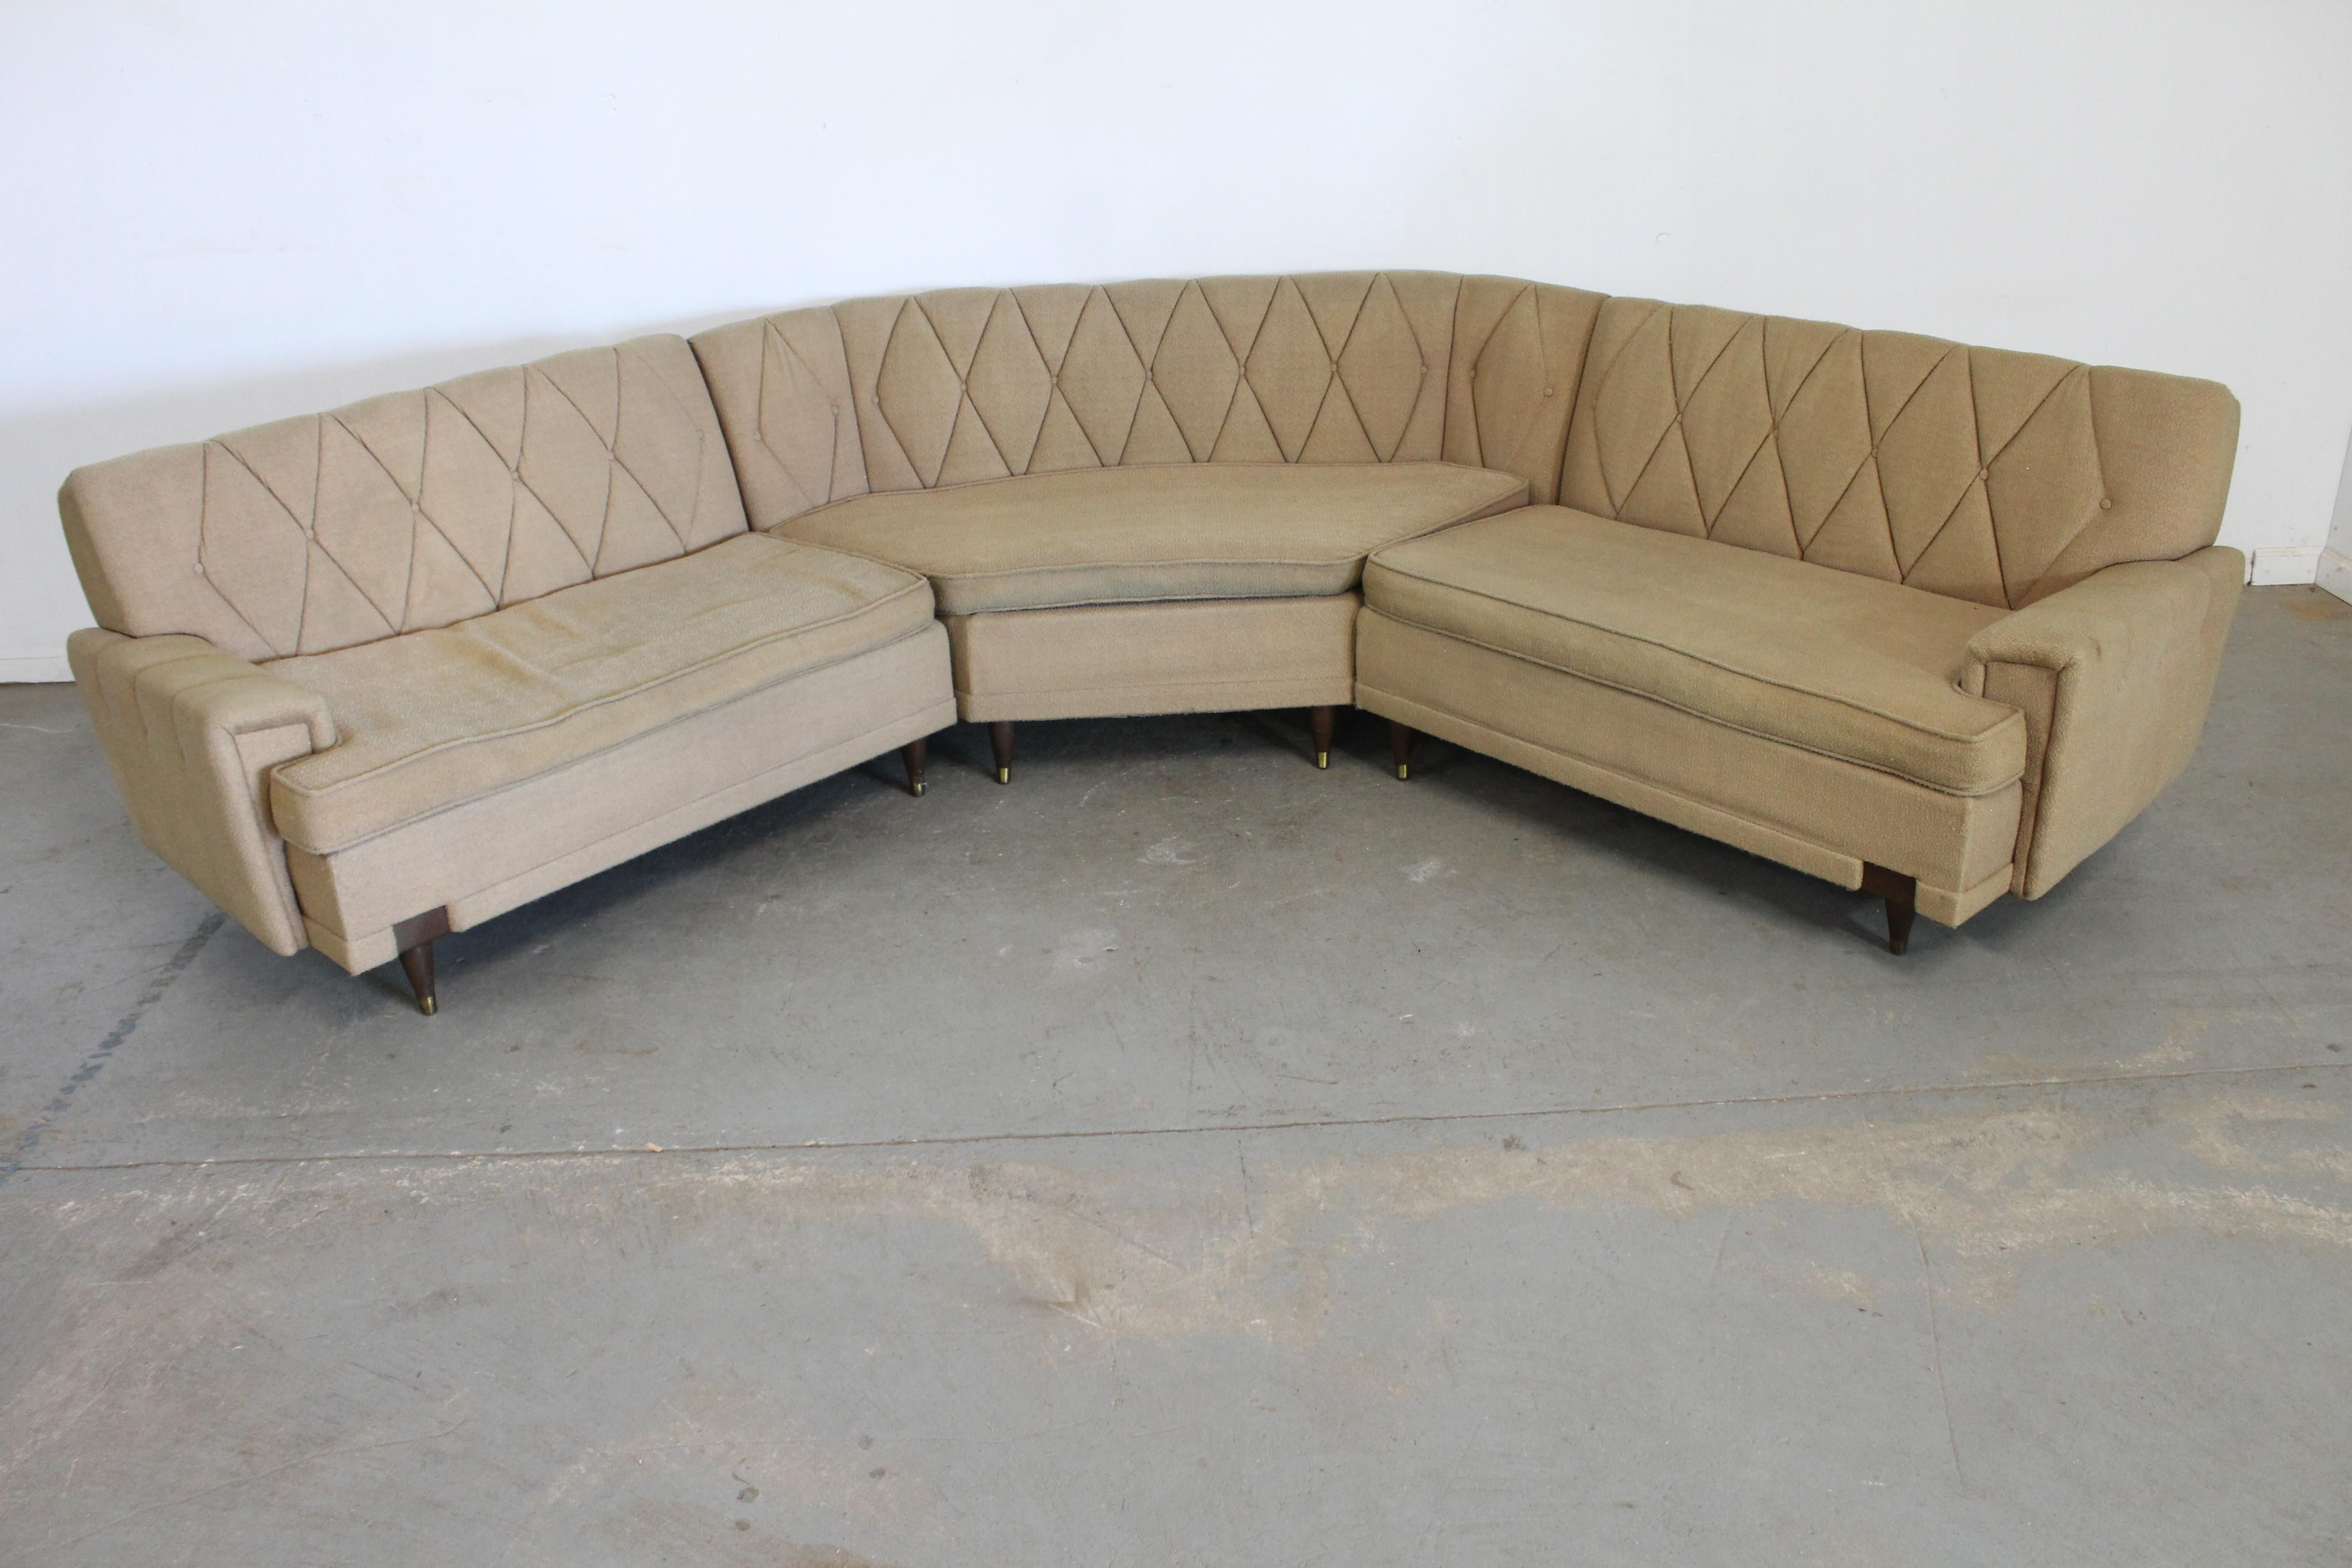 Mid-Century Modern Kroehler style 3-piece sectional sofa.

Offered is a Mid-Century Modern three-piece sectional sofa by Kroehler. This sofa has a super cool retro, modular style with upholstery. THe sofa separates into 3 sections( a center section